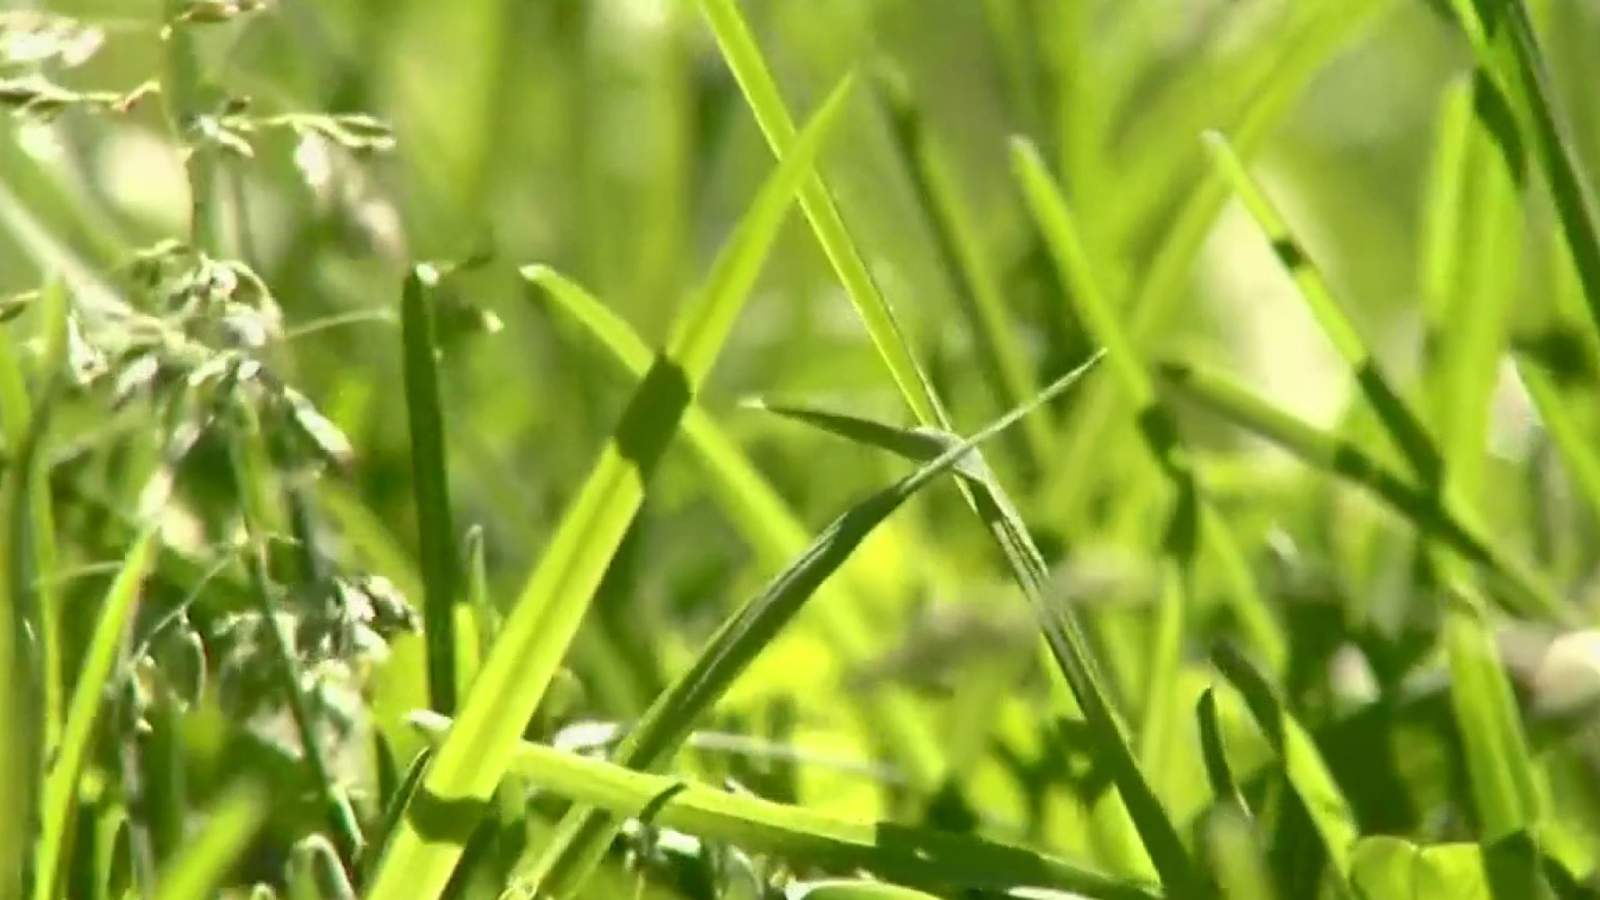 Metro Detroit landscaping company offers to mow lawns free for health care workers